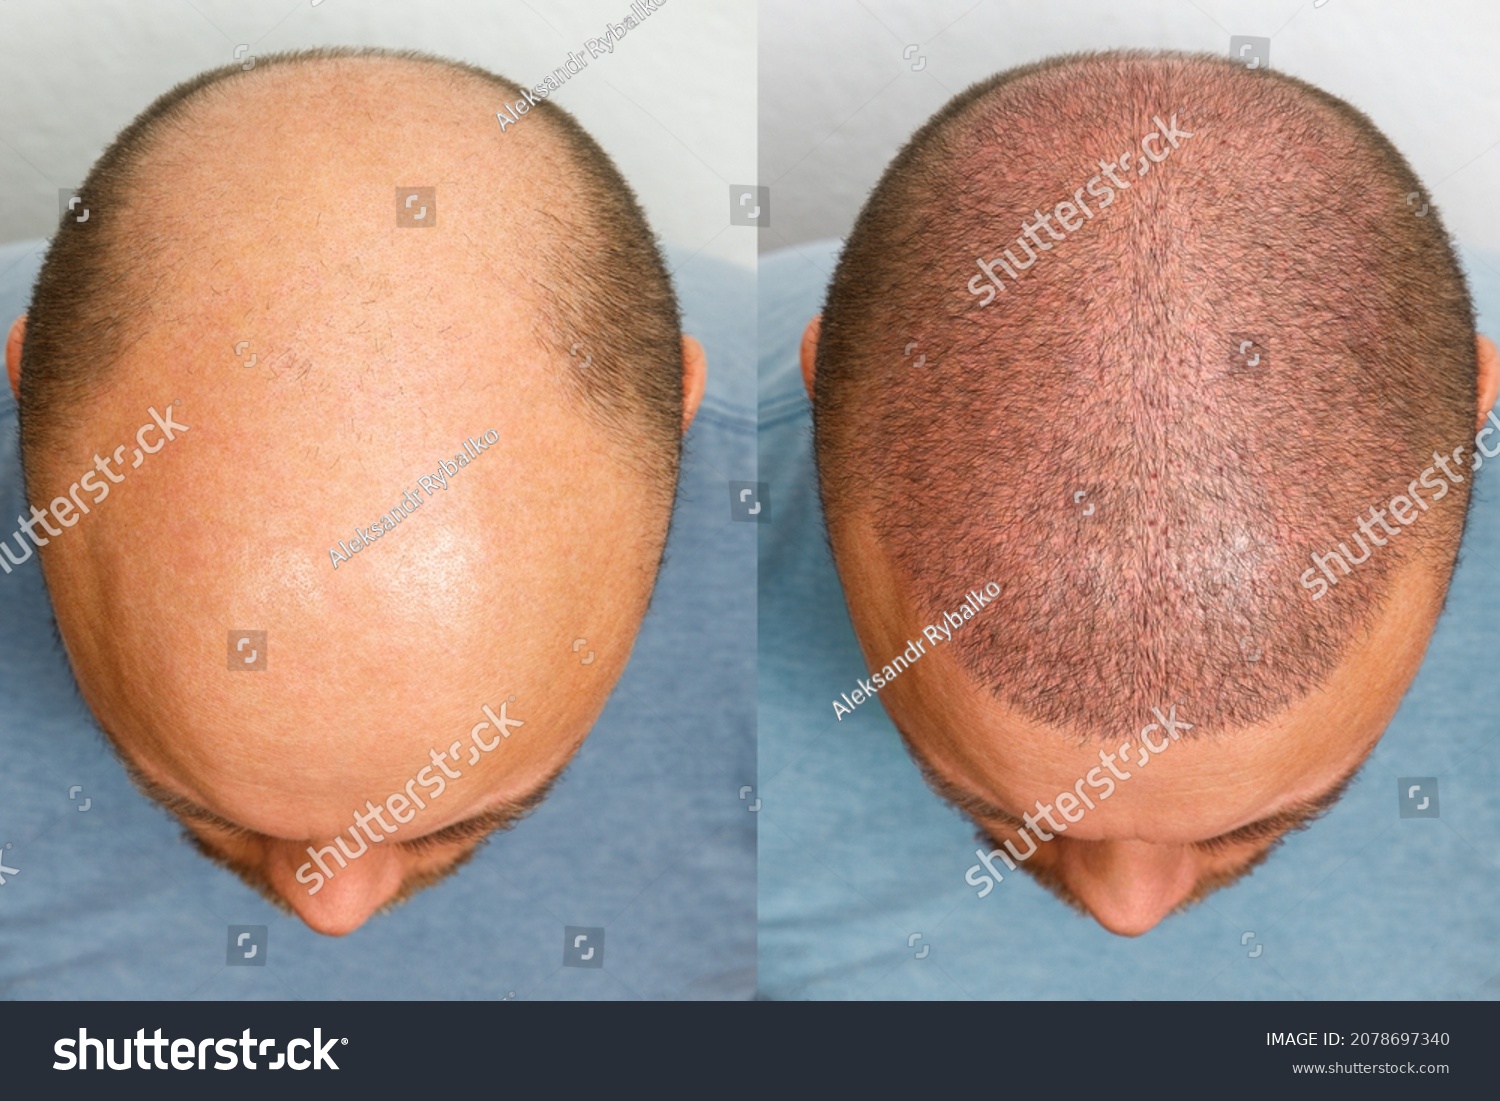 The head of a balding man before and after hair transplant surgery. A man losing his hair has become shaggy. An advertising poster for a hair transplant clinic. Treatment of baldness. #2078697340